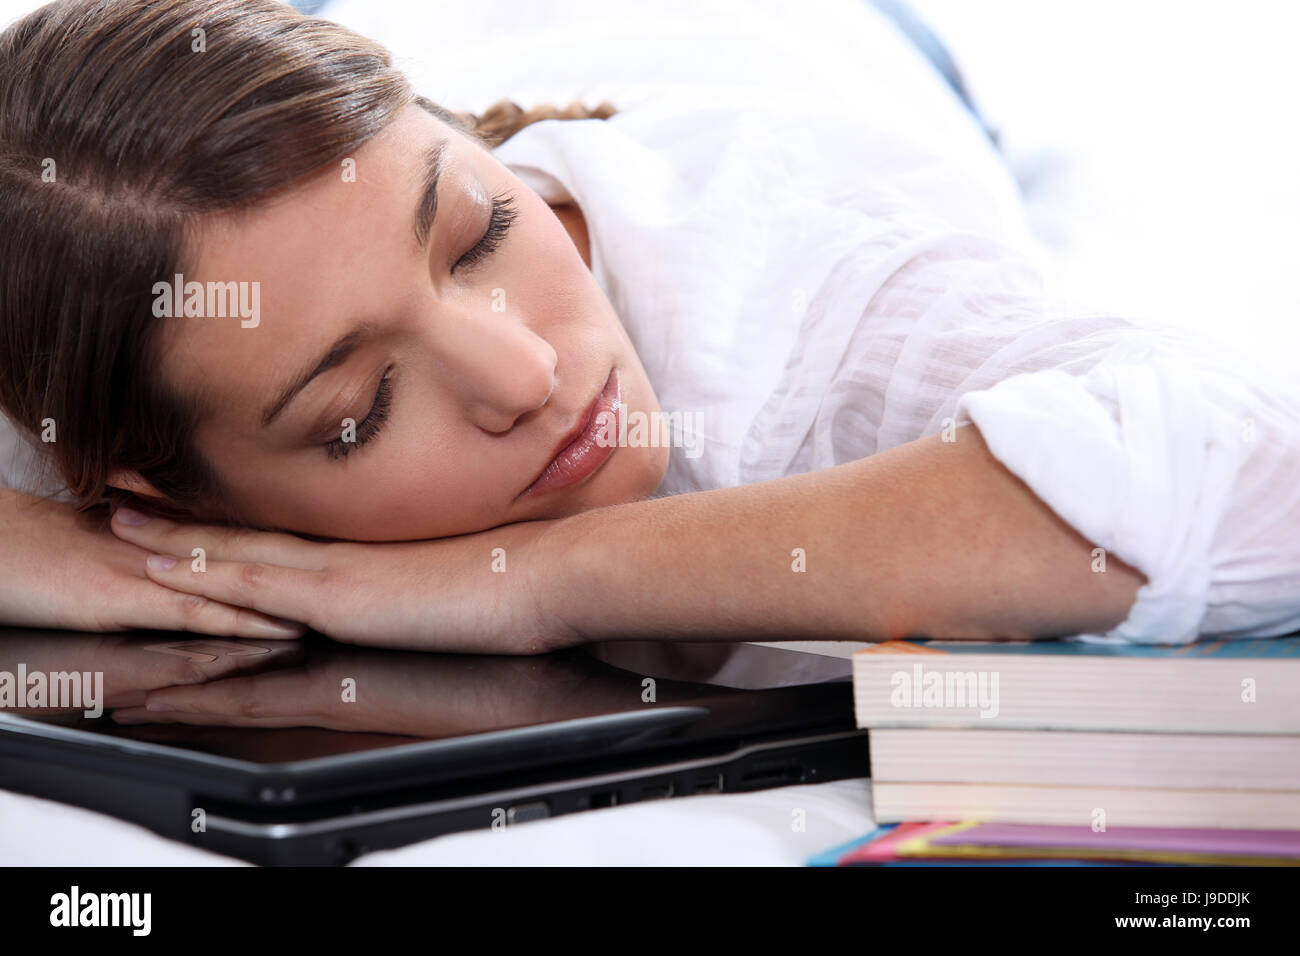 woman, laptop, notebook, computers, computer, night, nighttime, dream, hours, Stock Photo